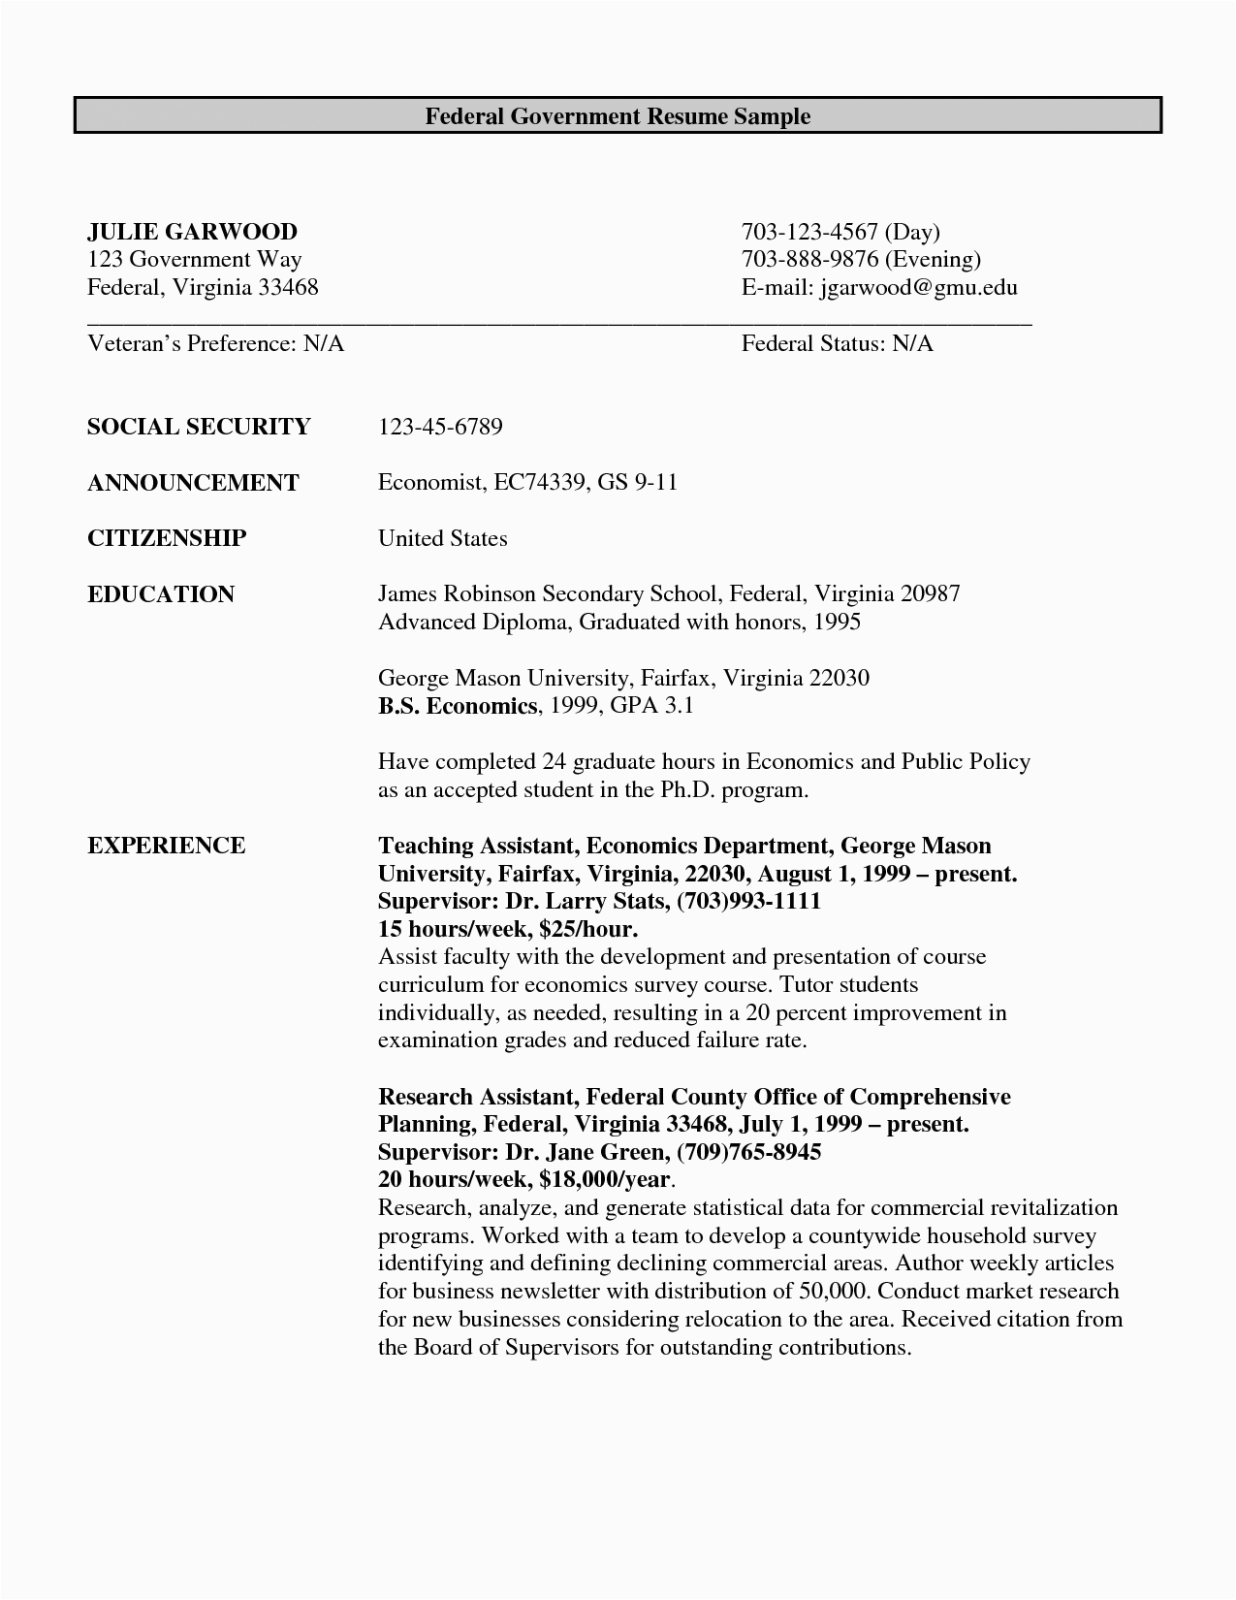 Sample Resume for Government Employee Philippines 11 Resume format for Authorities Job Philippines